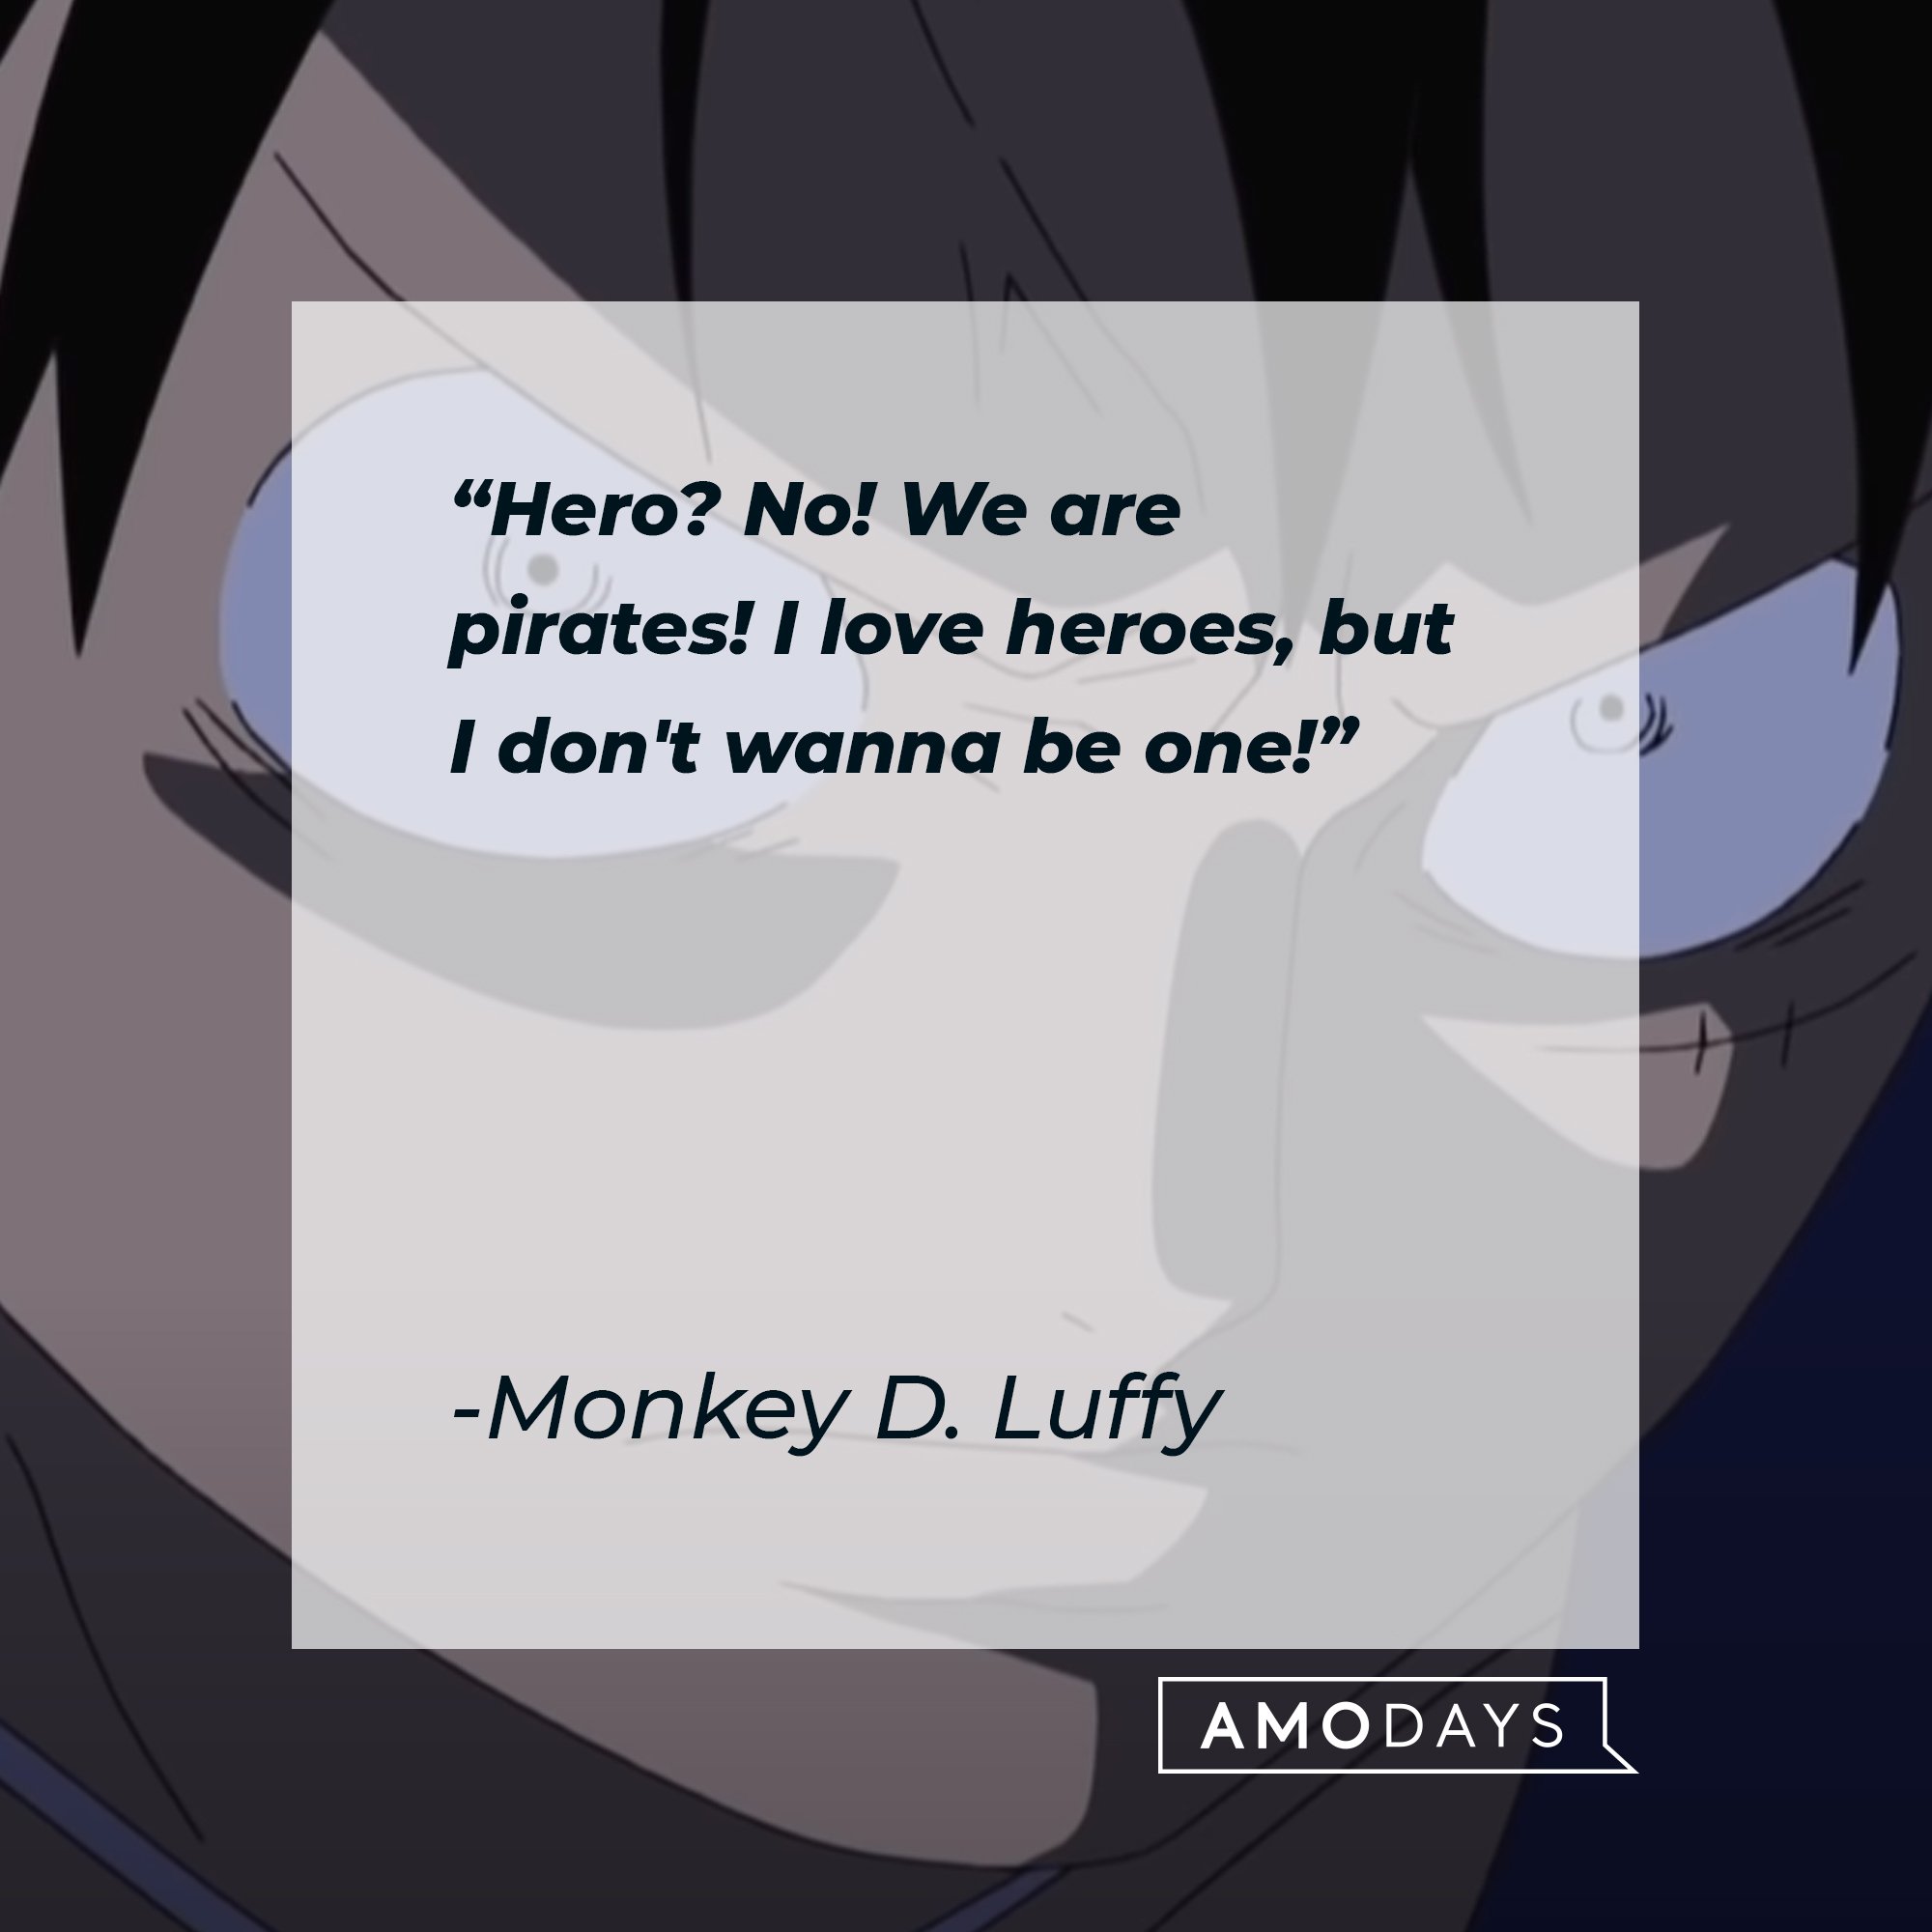 Monkey D. Luffy’s quote: "Hero? No! We are pirates! I love heroes, but I don't wanna be one!" | Image: AmoDays